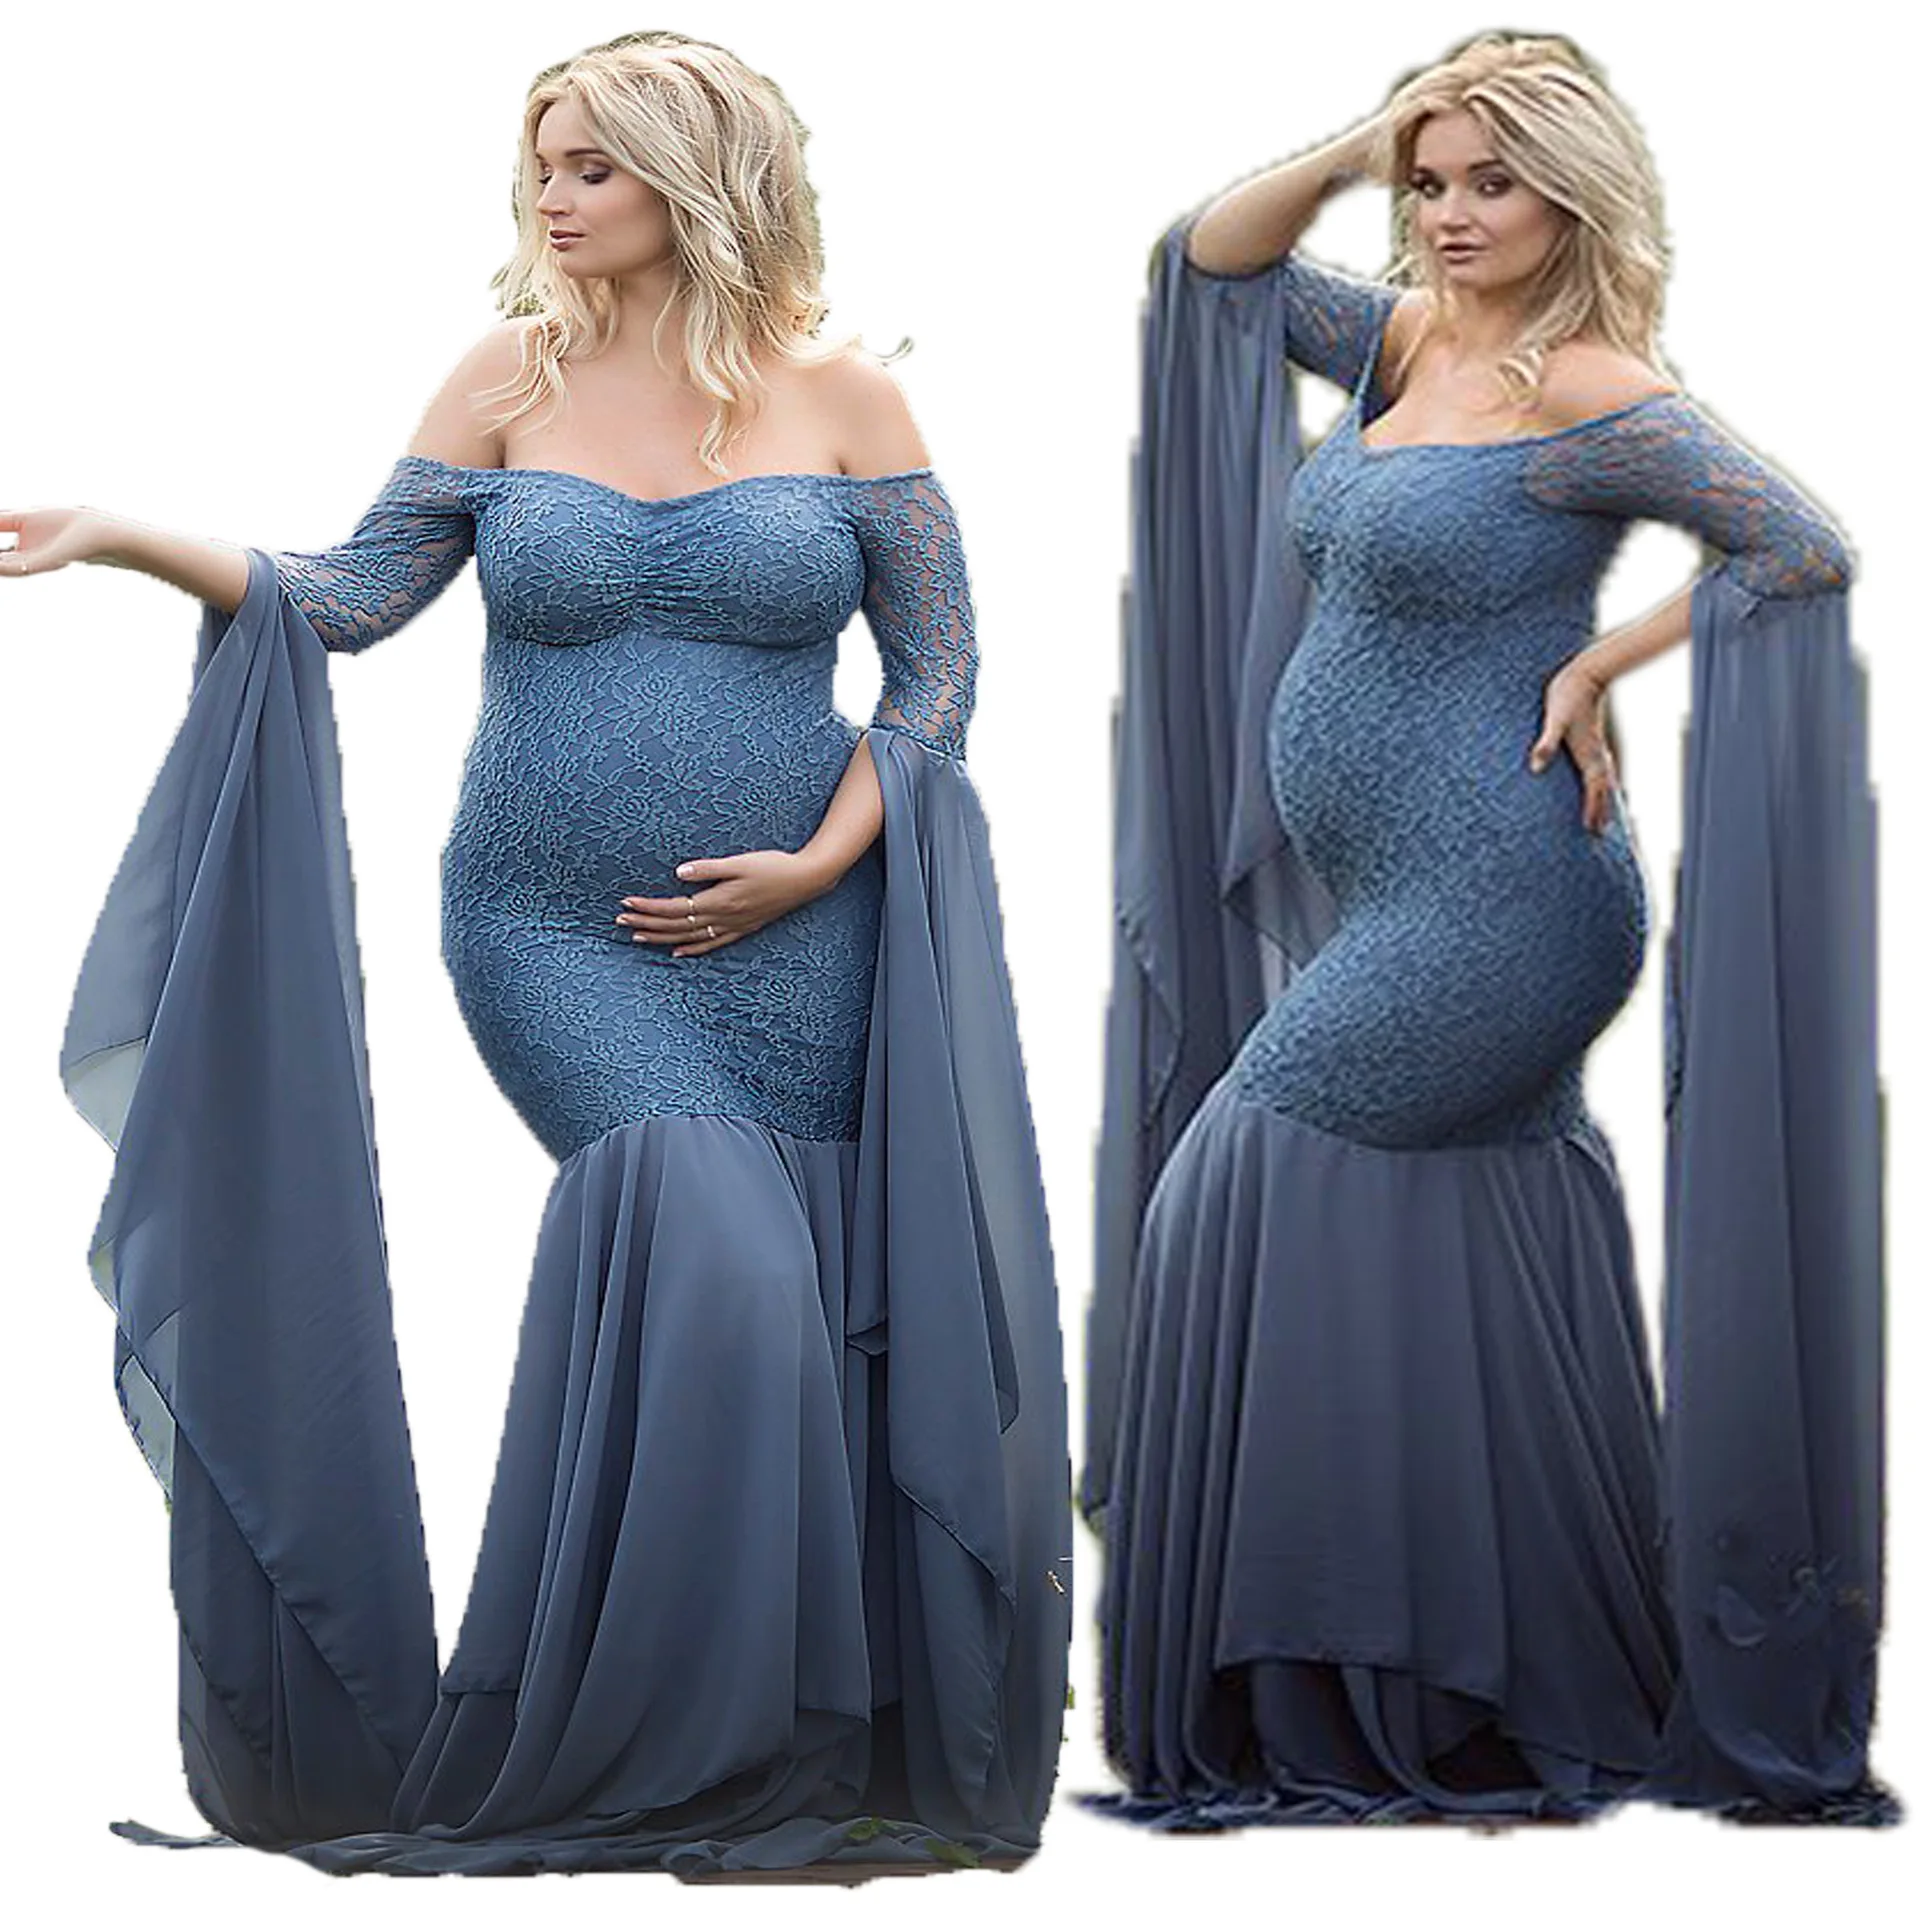 

New Long Sleeve Maternity Gown Lace Maxi Dress Pregnant Women Photography Pregnancy Dress Maternity Dresses for Photo Shoot Prop